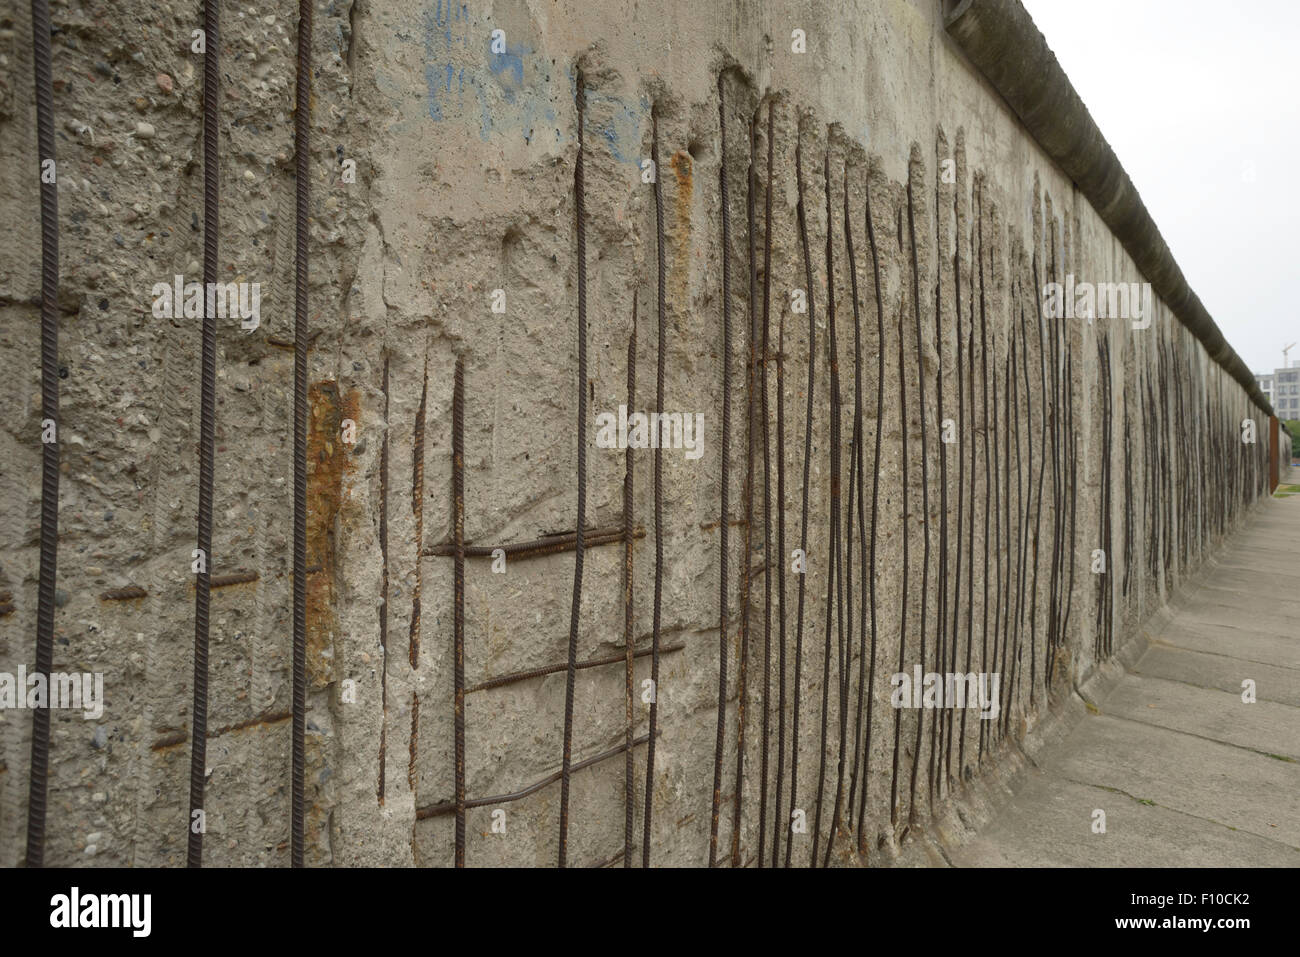 The Berlin Wall Memorial is the central memorial site of German division, Bernauer Strasse, the last piece of Berlin Wall. Stock Photo